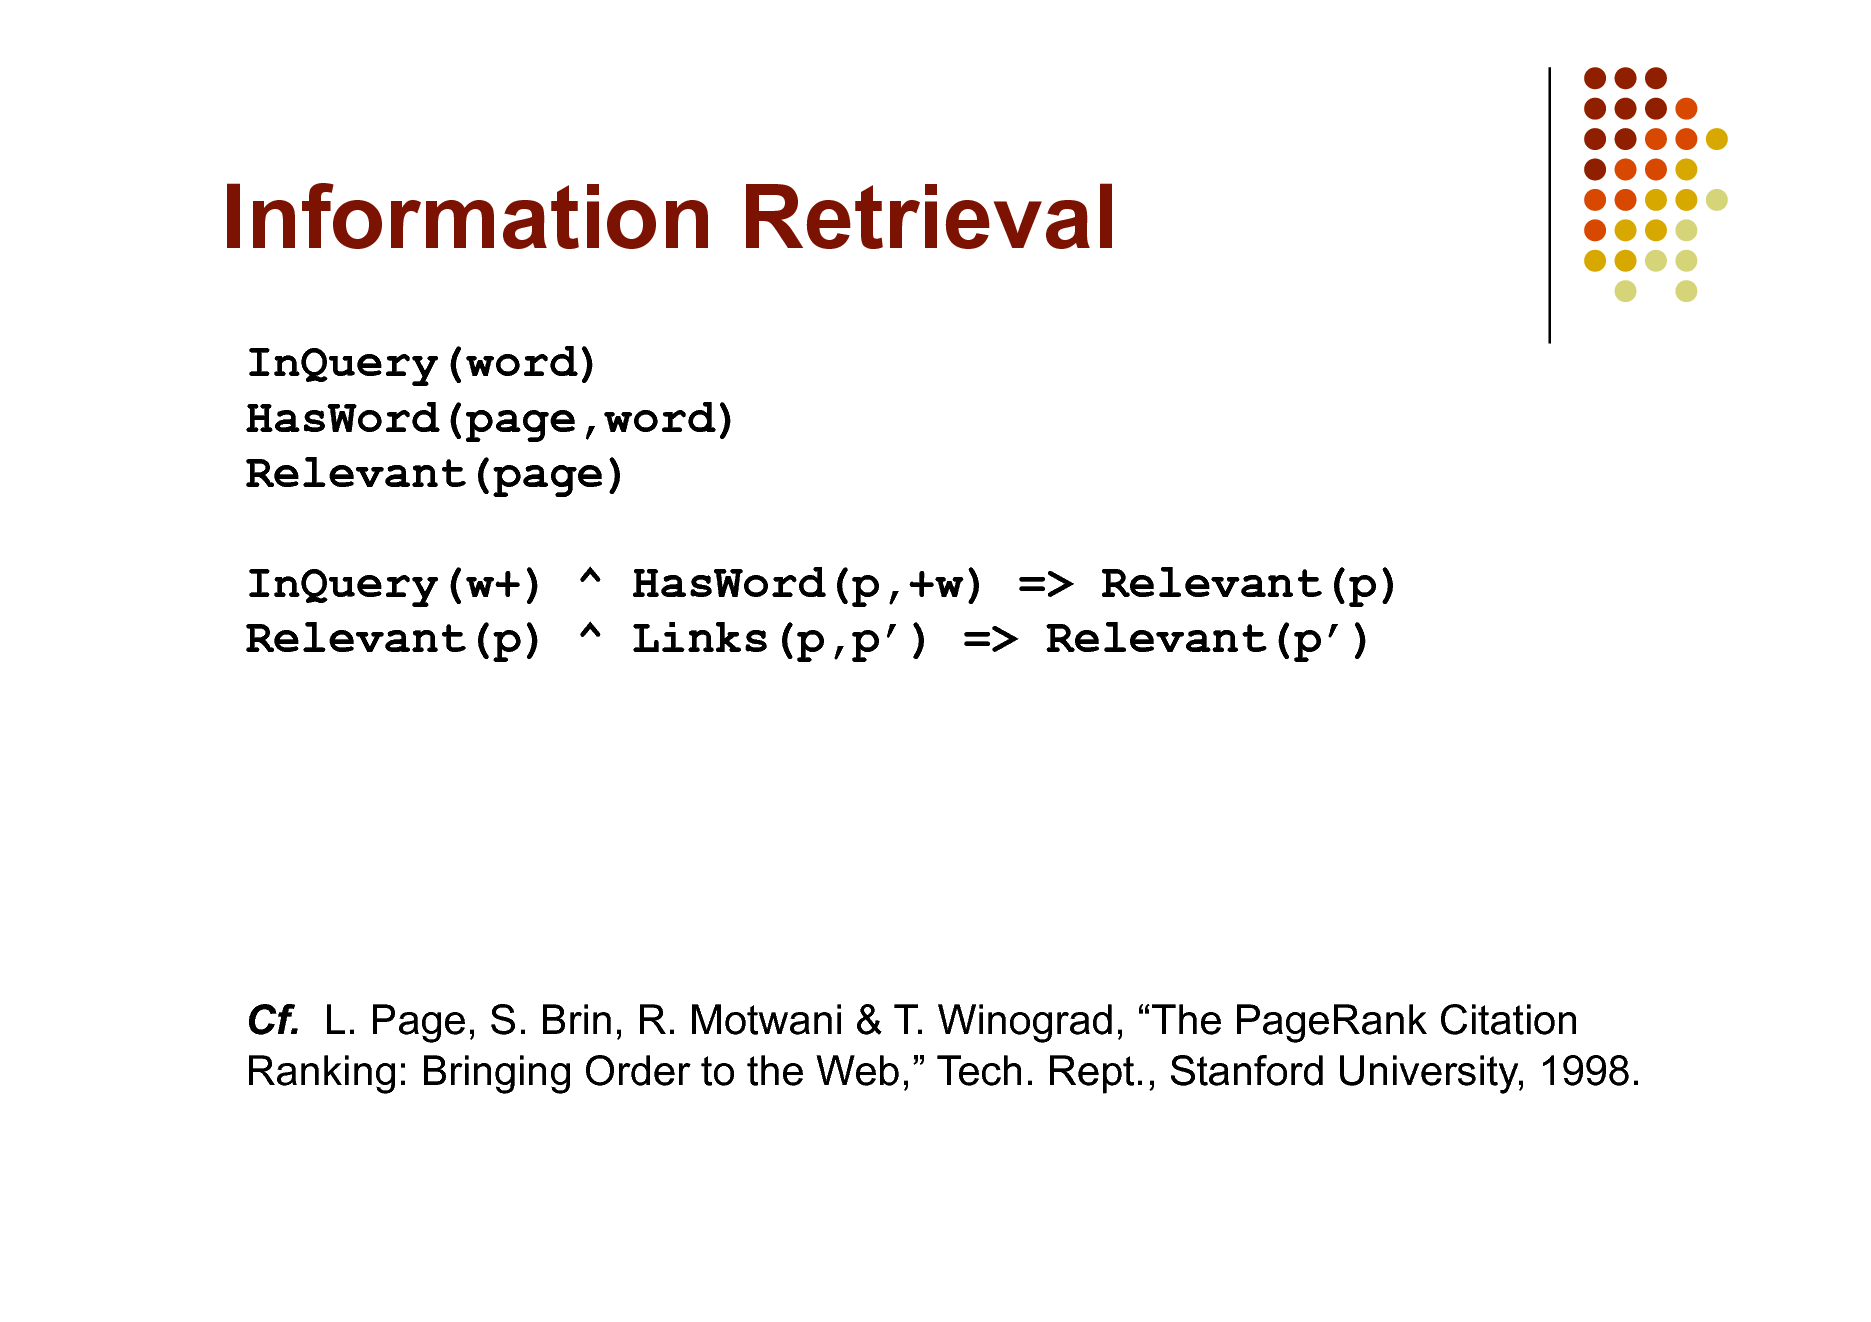 Slide: Information Retrieval
InQuery(word) HasWord(page,word) Relevant(page) InQuery(w+) ^ HasWord(p,+w) => Relevant(p) Relevant(p) ^ Links(p,p) => Relevant(p)

Cf. L. Page, S. Brin, R. Motwani & T. Winograd, The PageRank Citation Ranking: Bringing Order to the Web, Tech. Rept., Stanford University, 1998.

